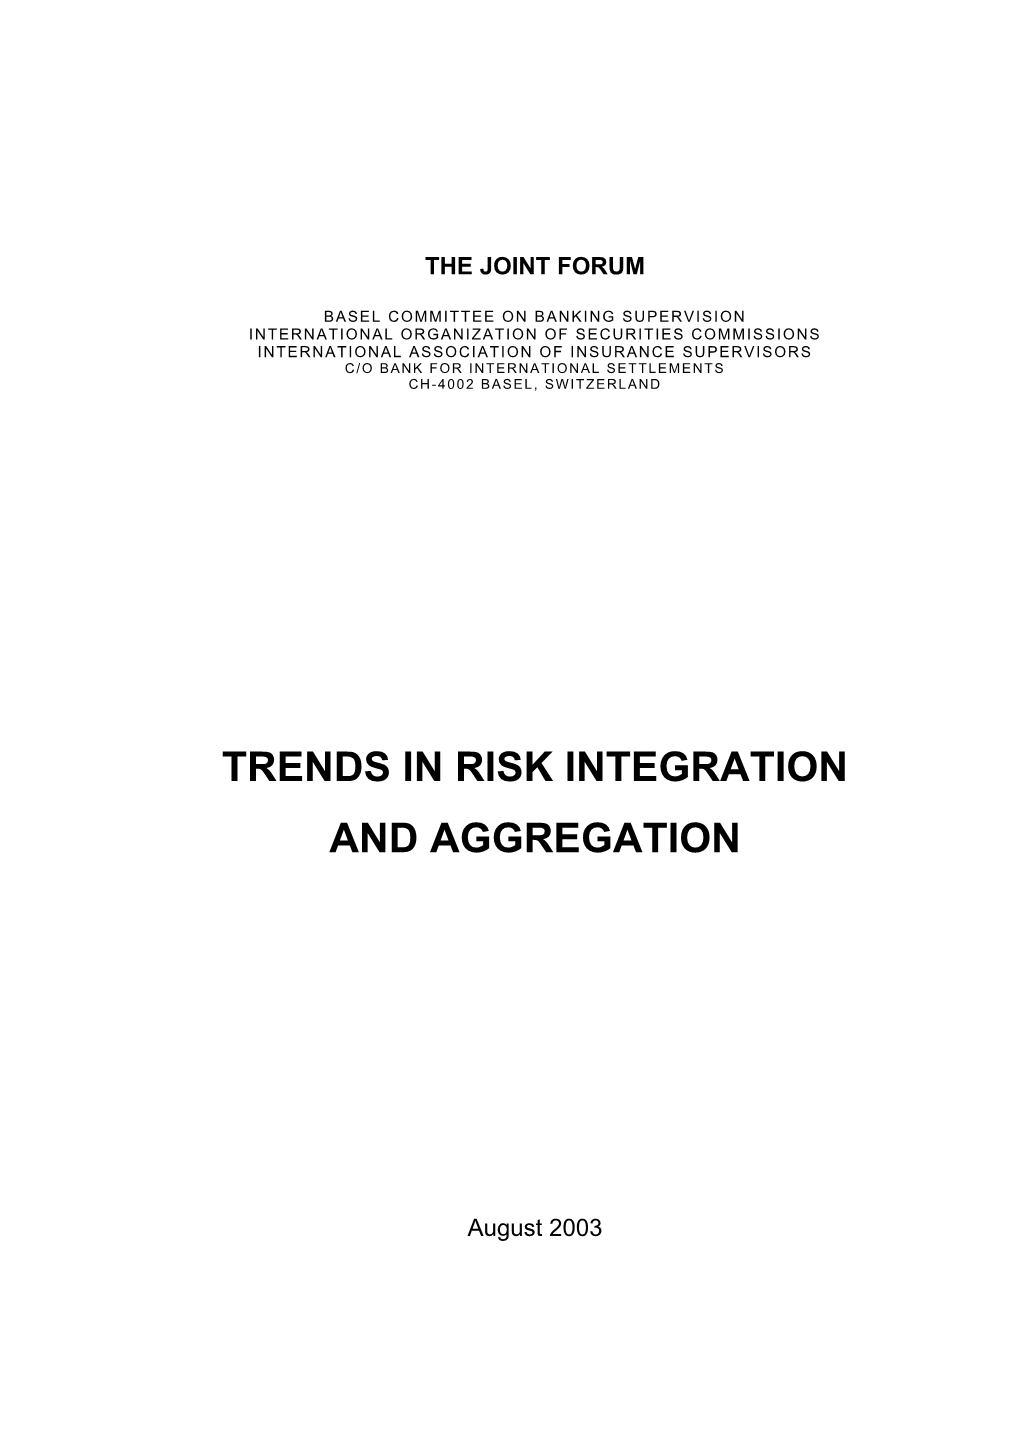 Trends in Risk Integration and Aggregation